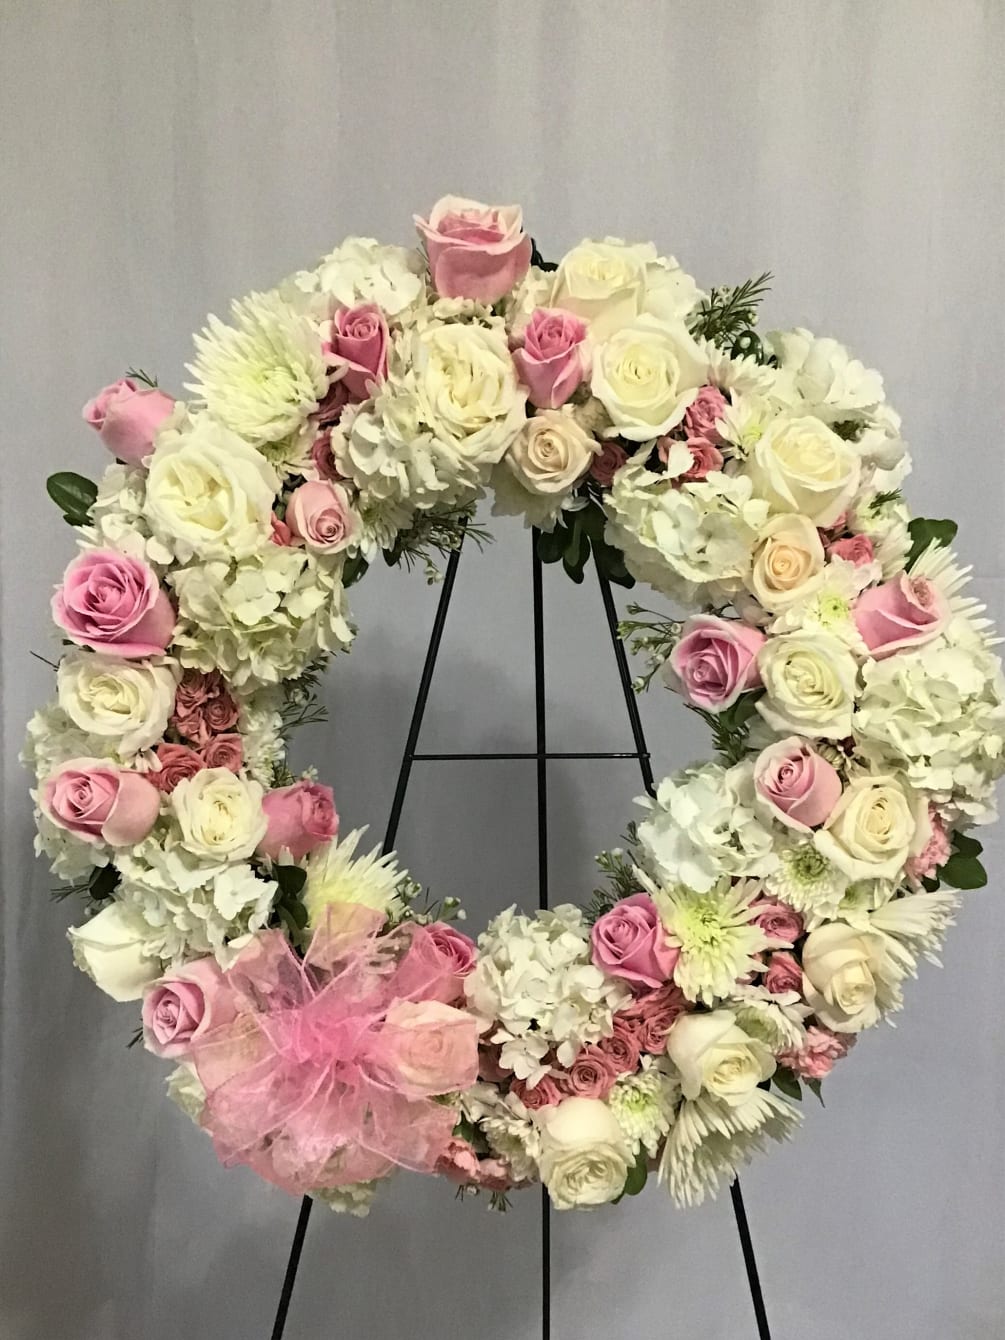 Beautiful wreath with cr&egrave;me and pink roses, white hydrangea and white chrysanthemums